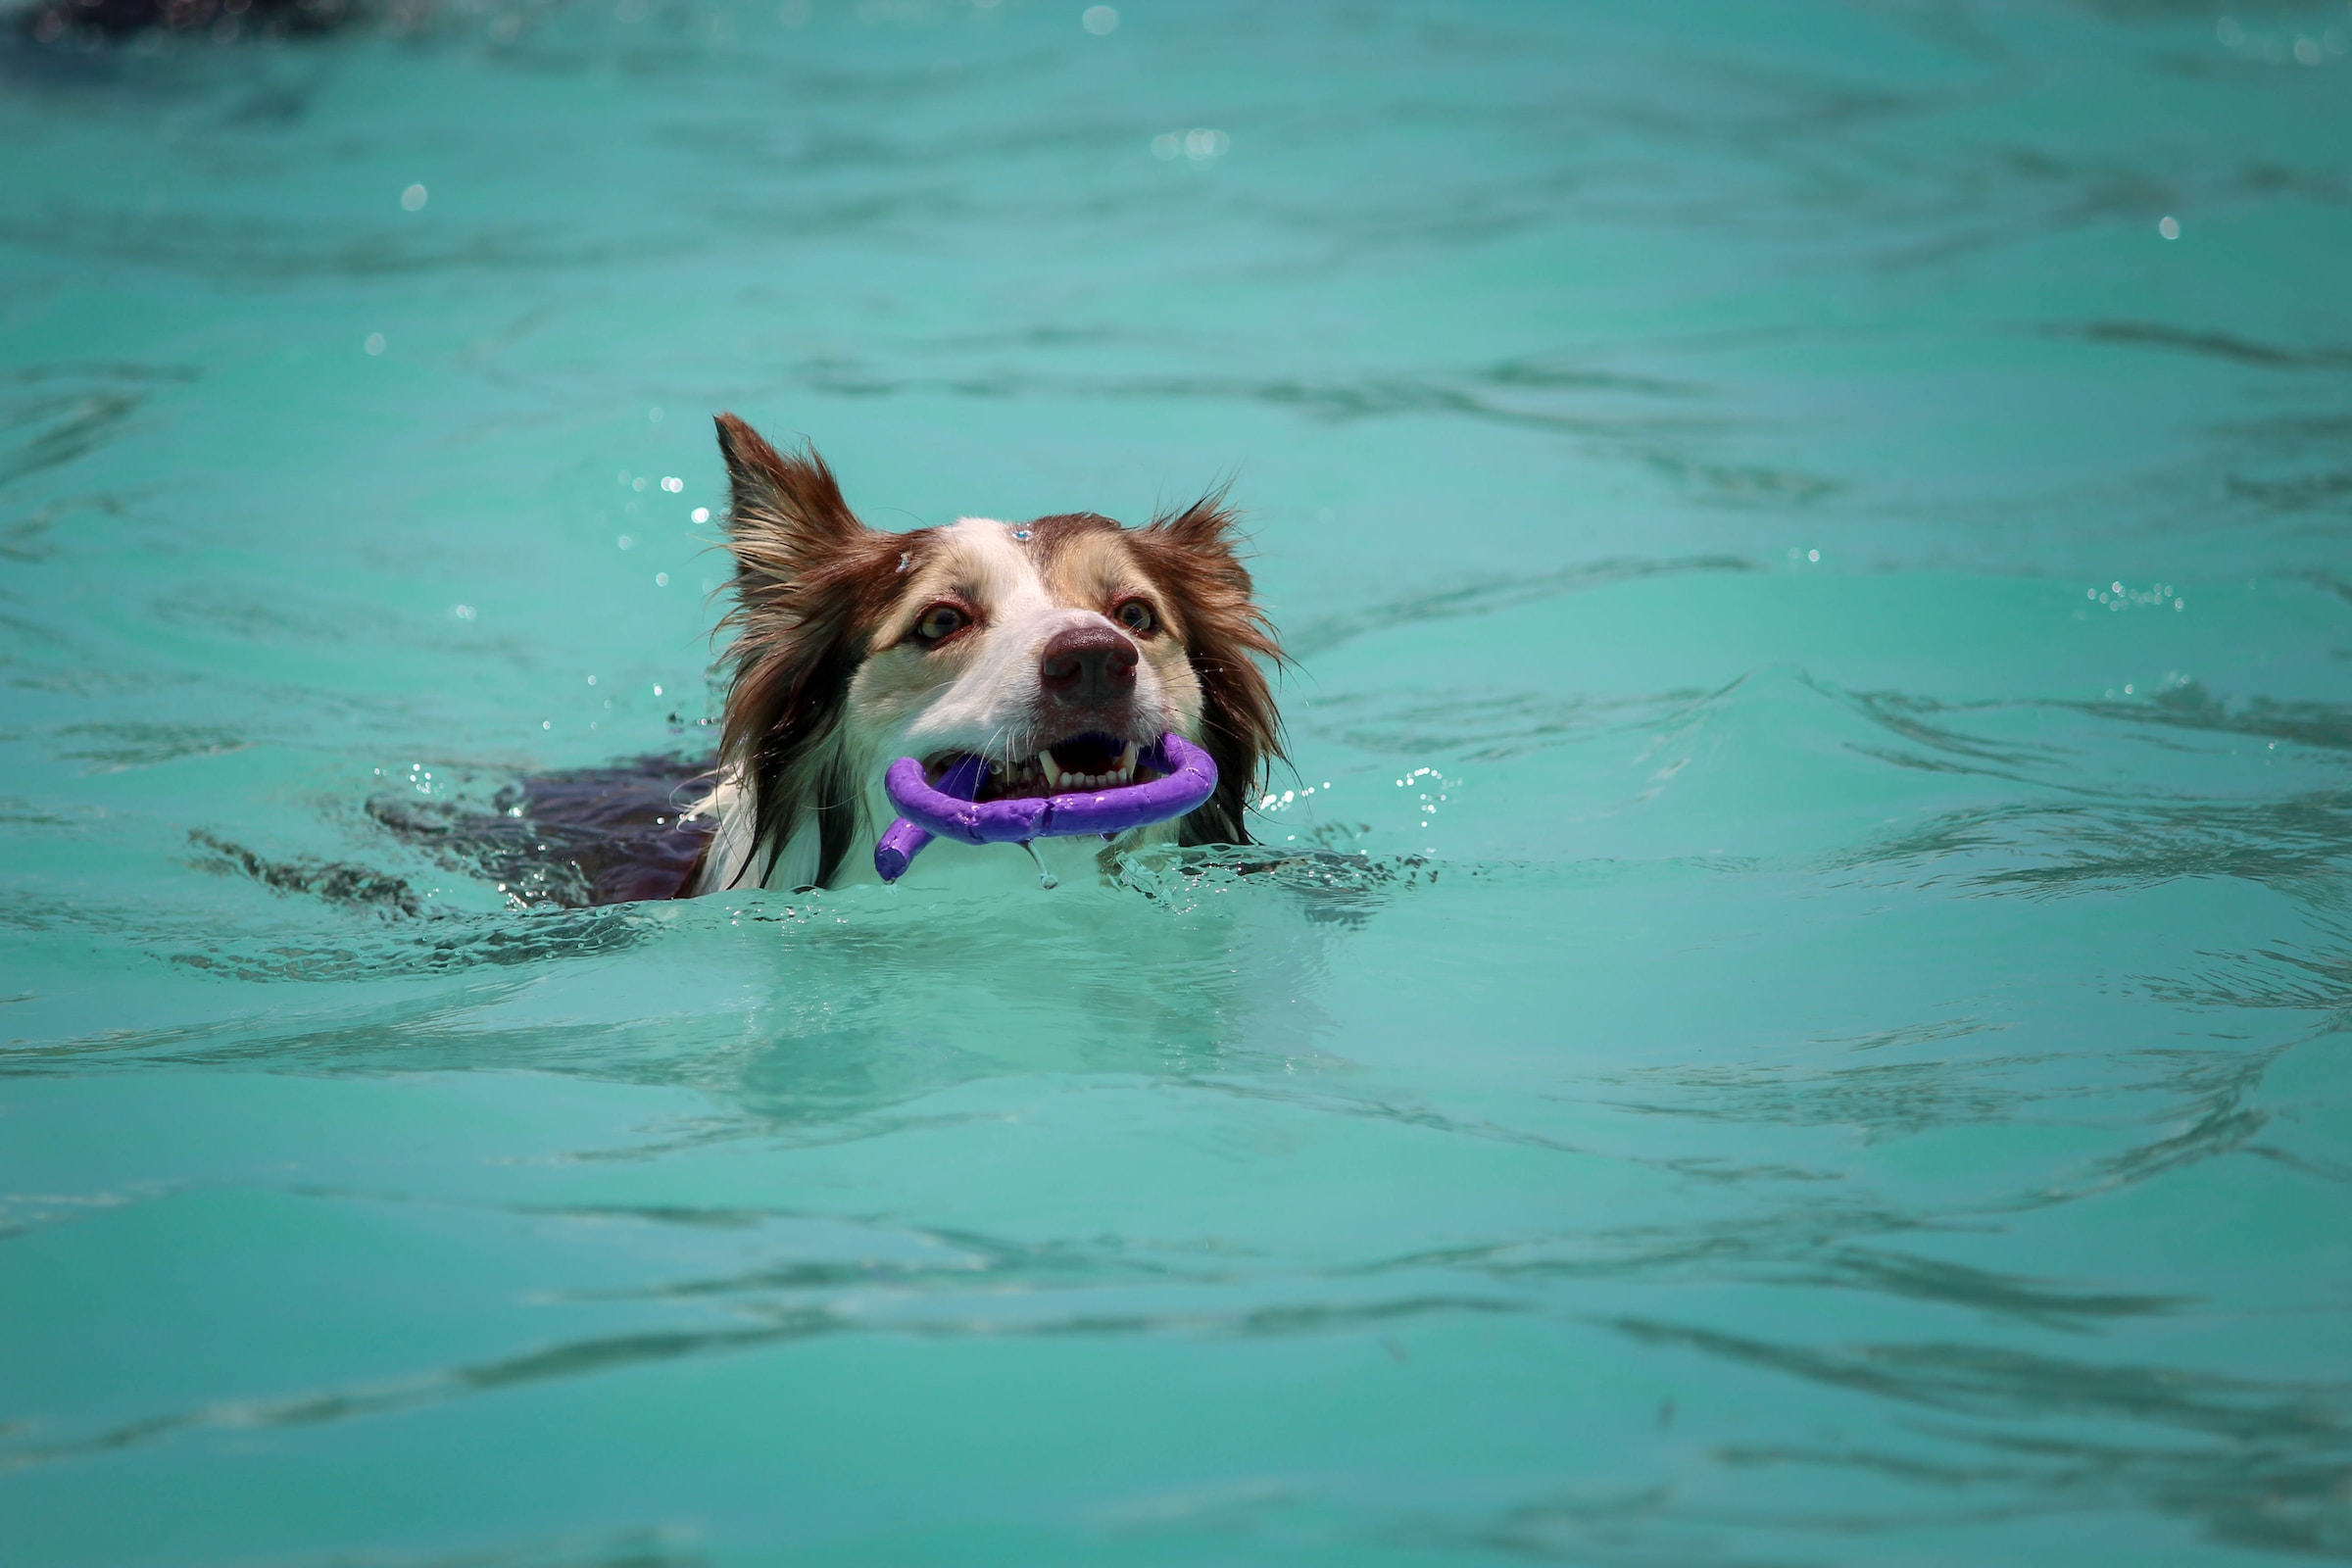 A dog swimming in a pool recieving hydrotherapy water treatment